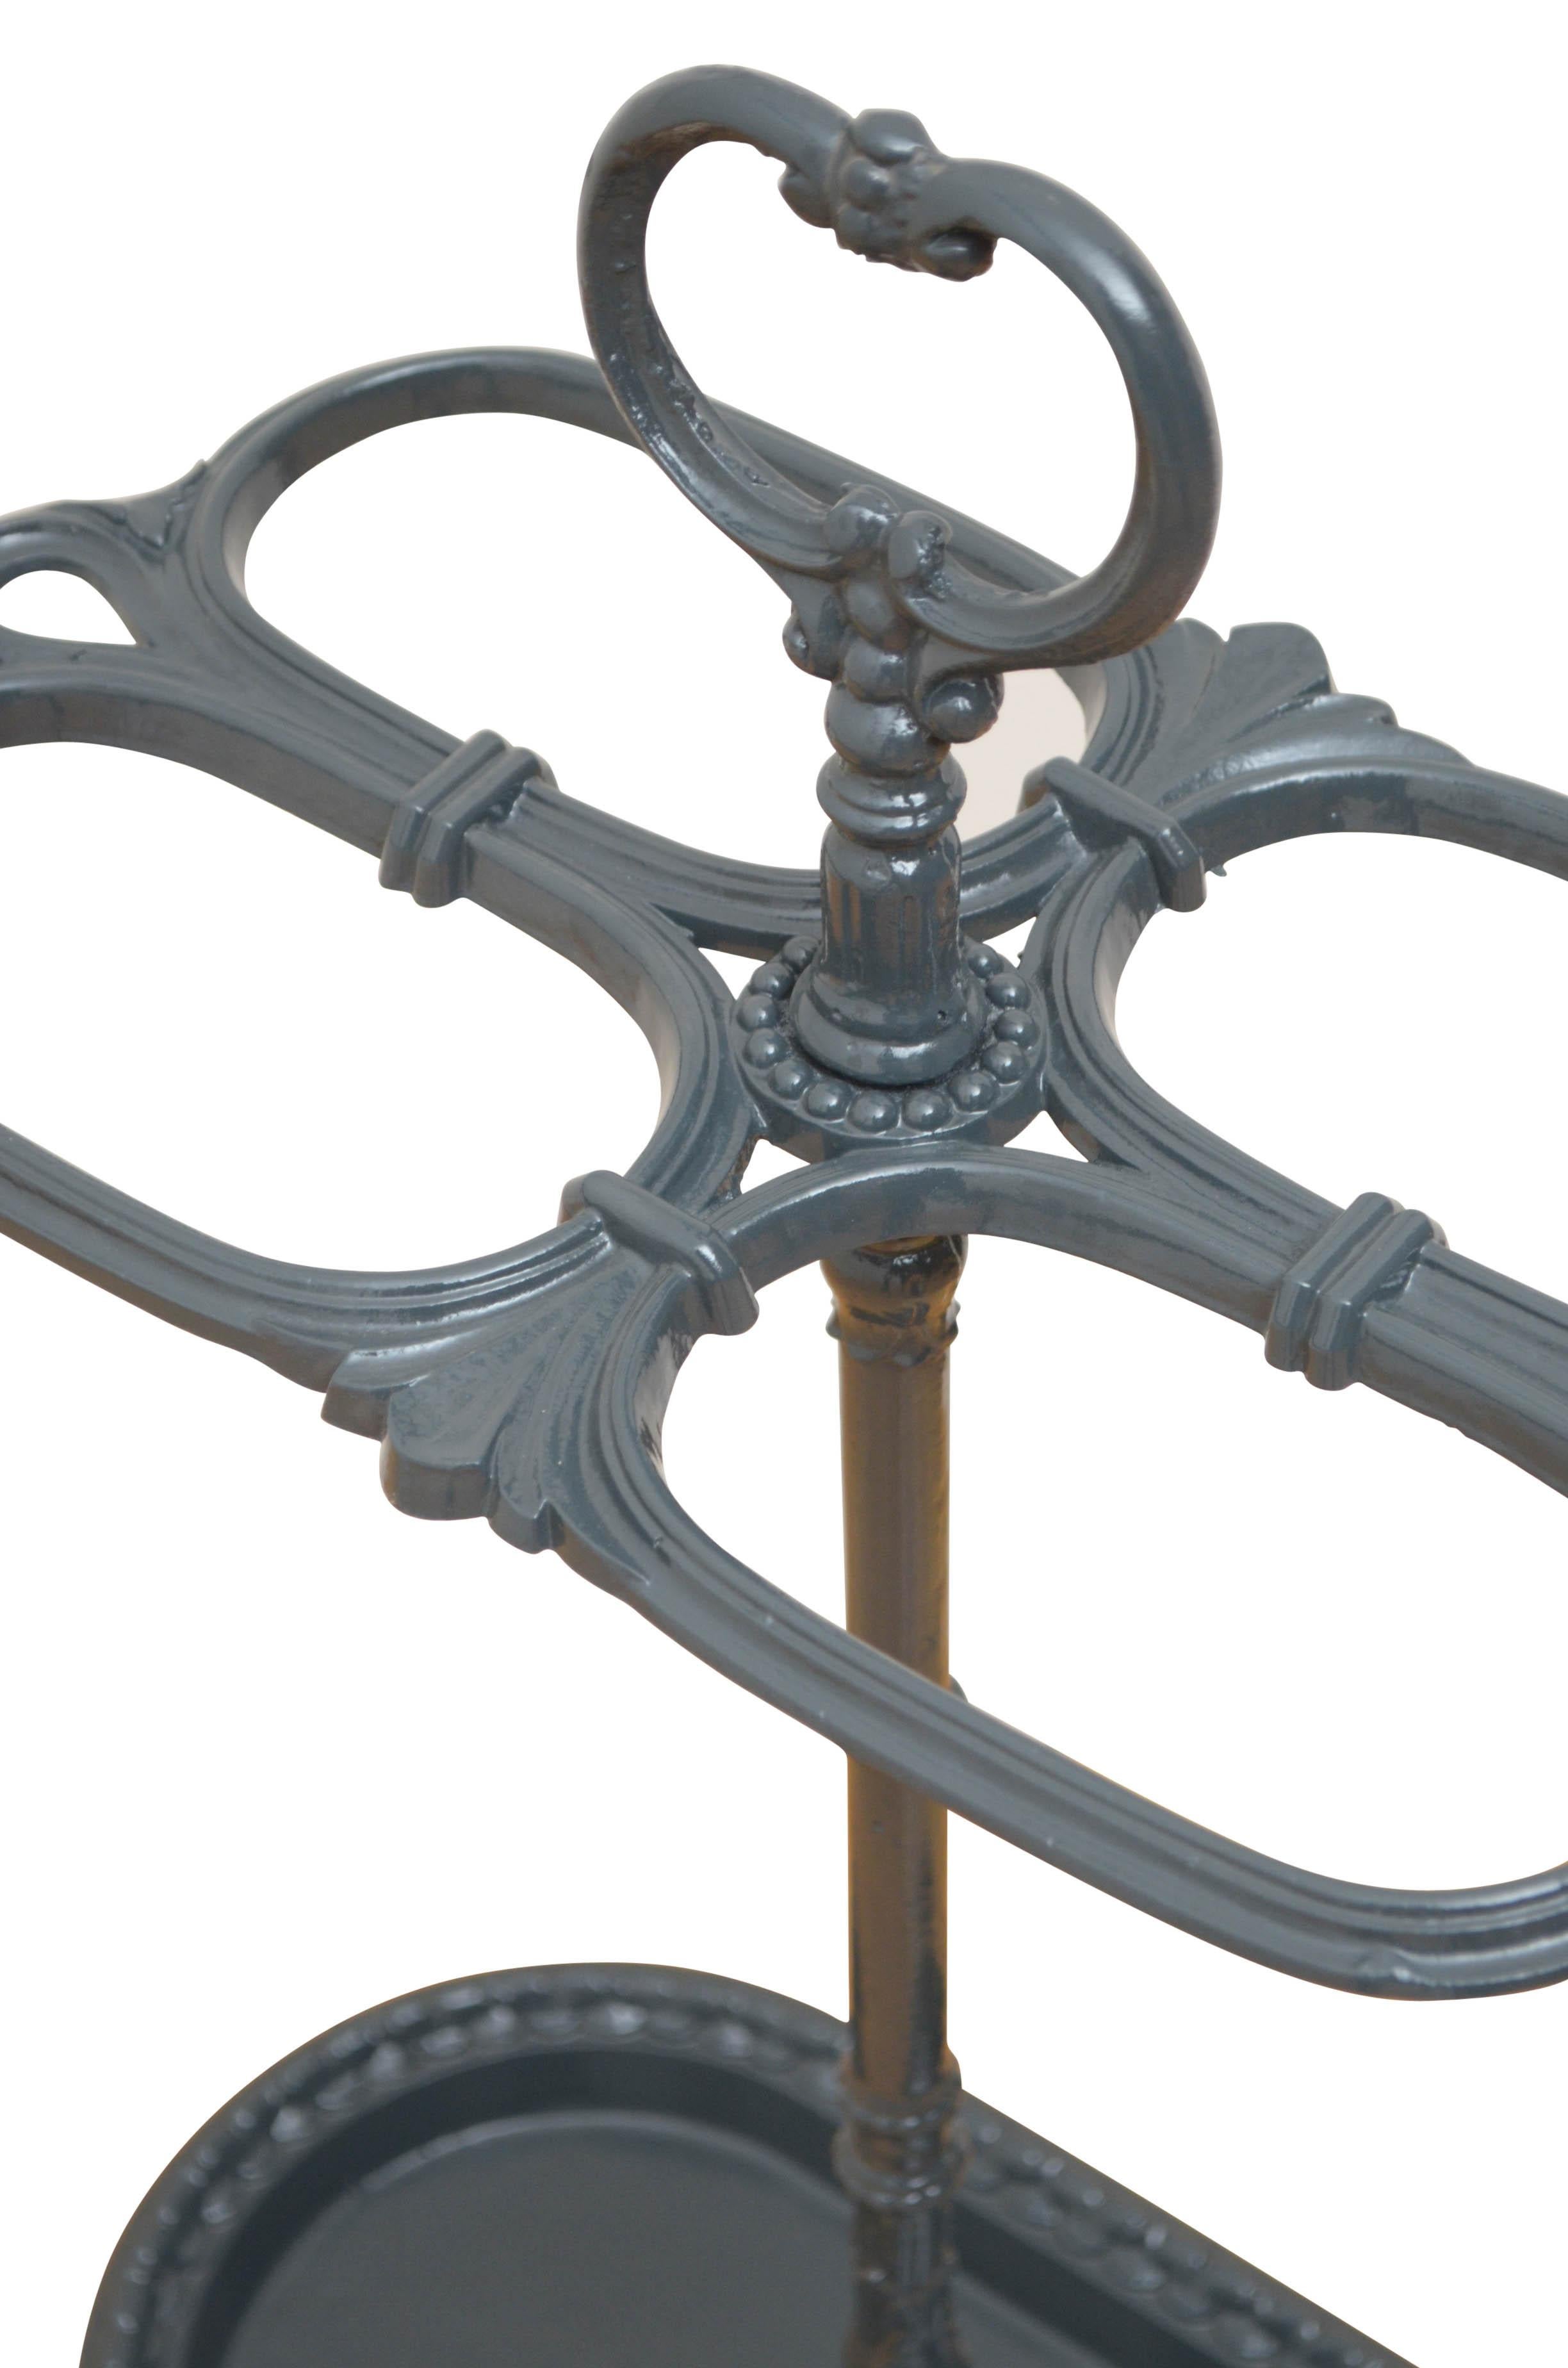 K0360 Stylish 19th century grey umbrella or walking cane stand having a loop finial and four compartments on decorative column terminating in oval drip tray. This antique umbrella stands has been powdercoated in grey and is now ready to use at home,